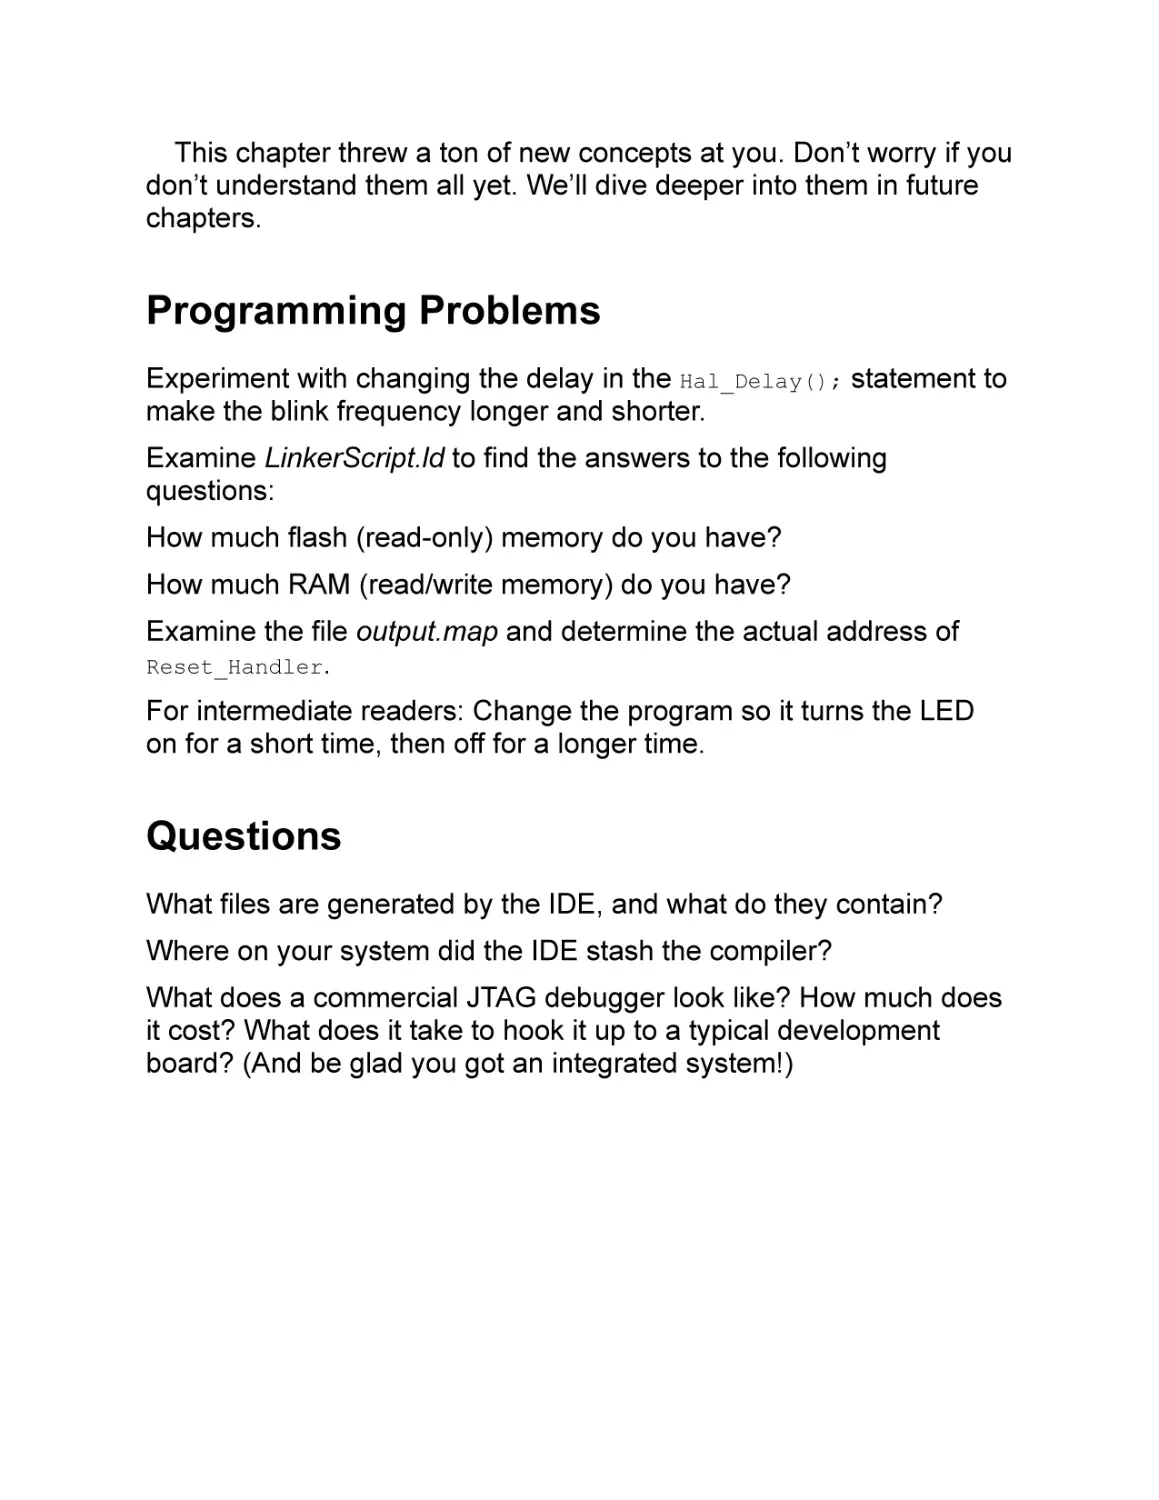 Programming Problems
Questions